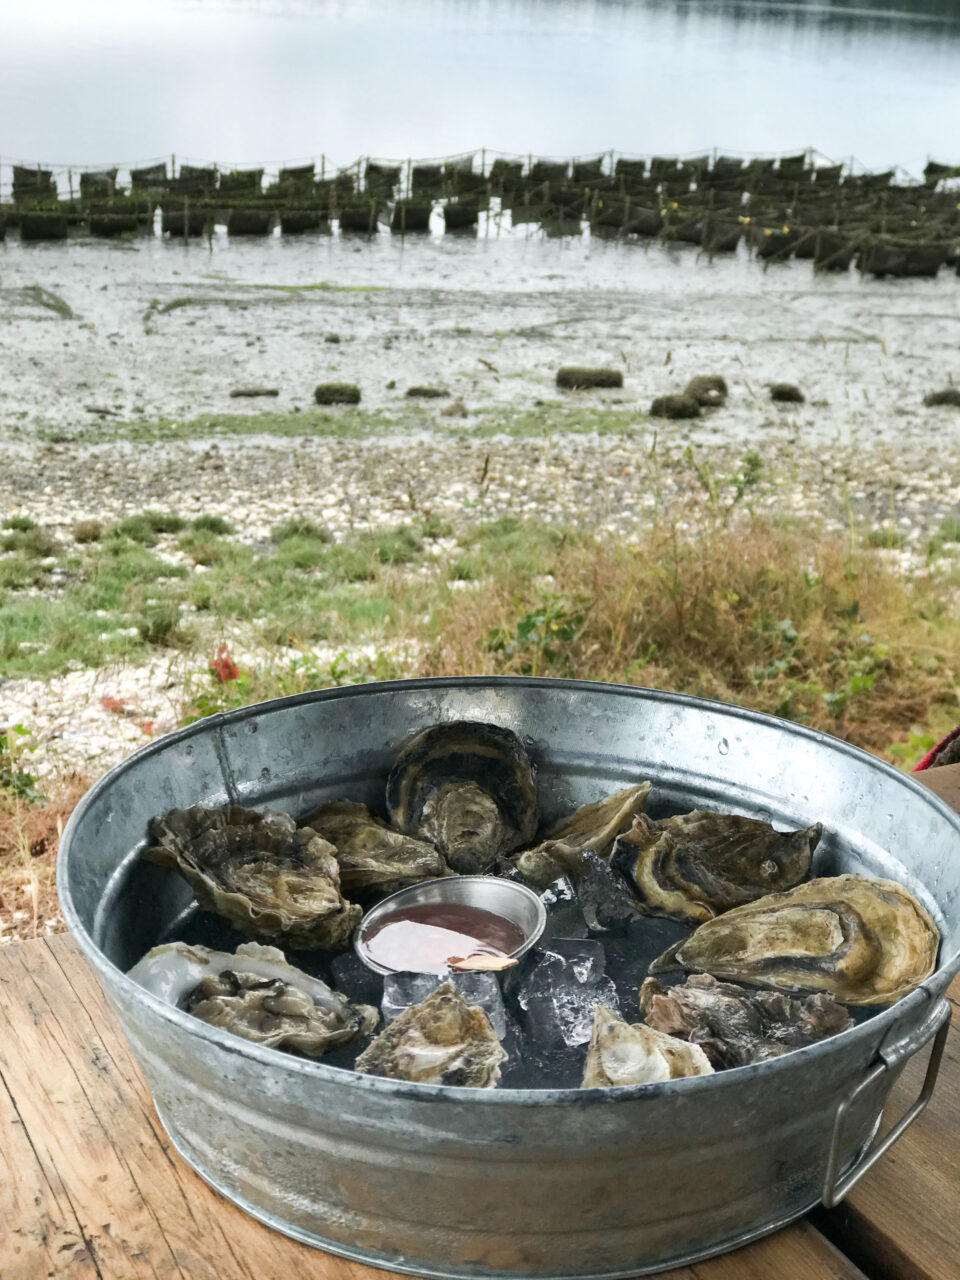 One of the best restaurants is the Westport Shellfish Co, where you can eat the fresh-farmed oysters.